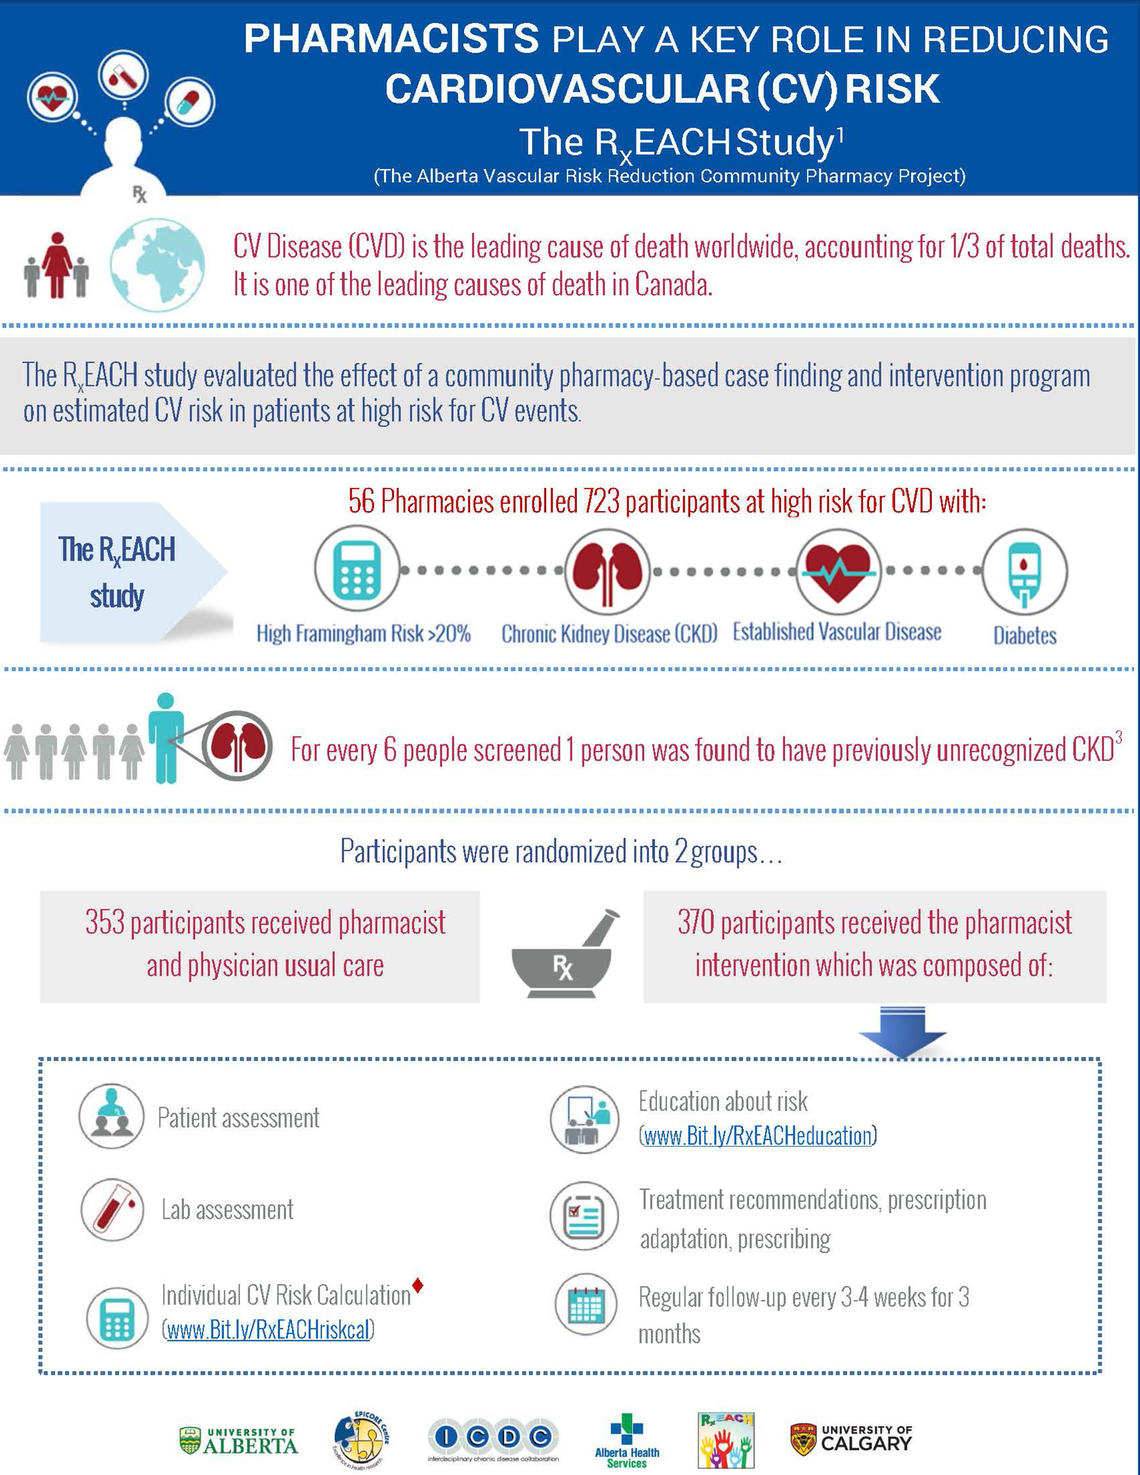 Infographic showing how pharmacists play a role in reducing CV events